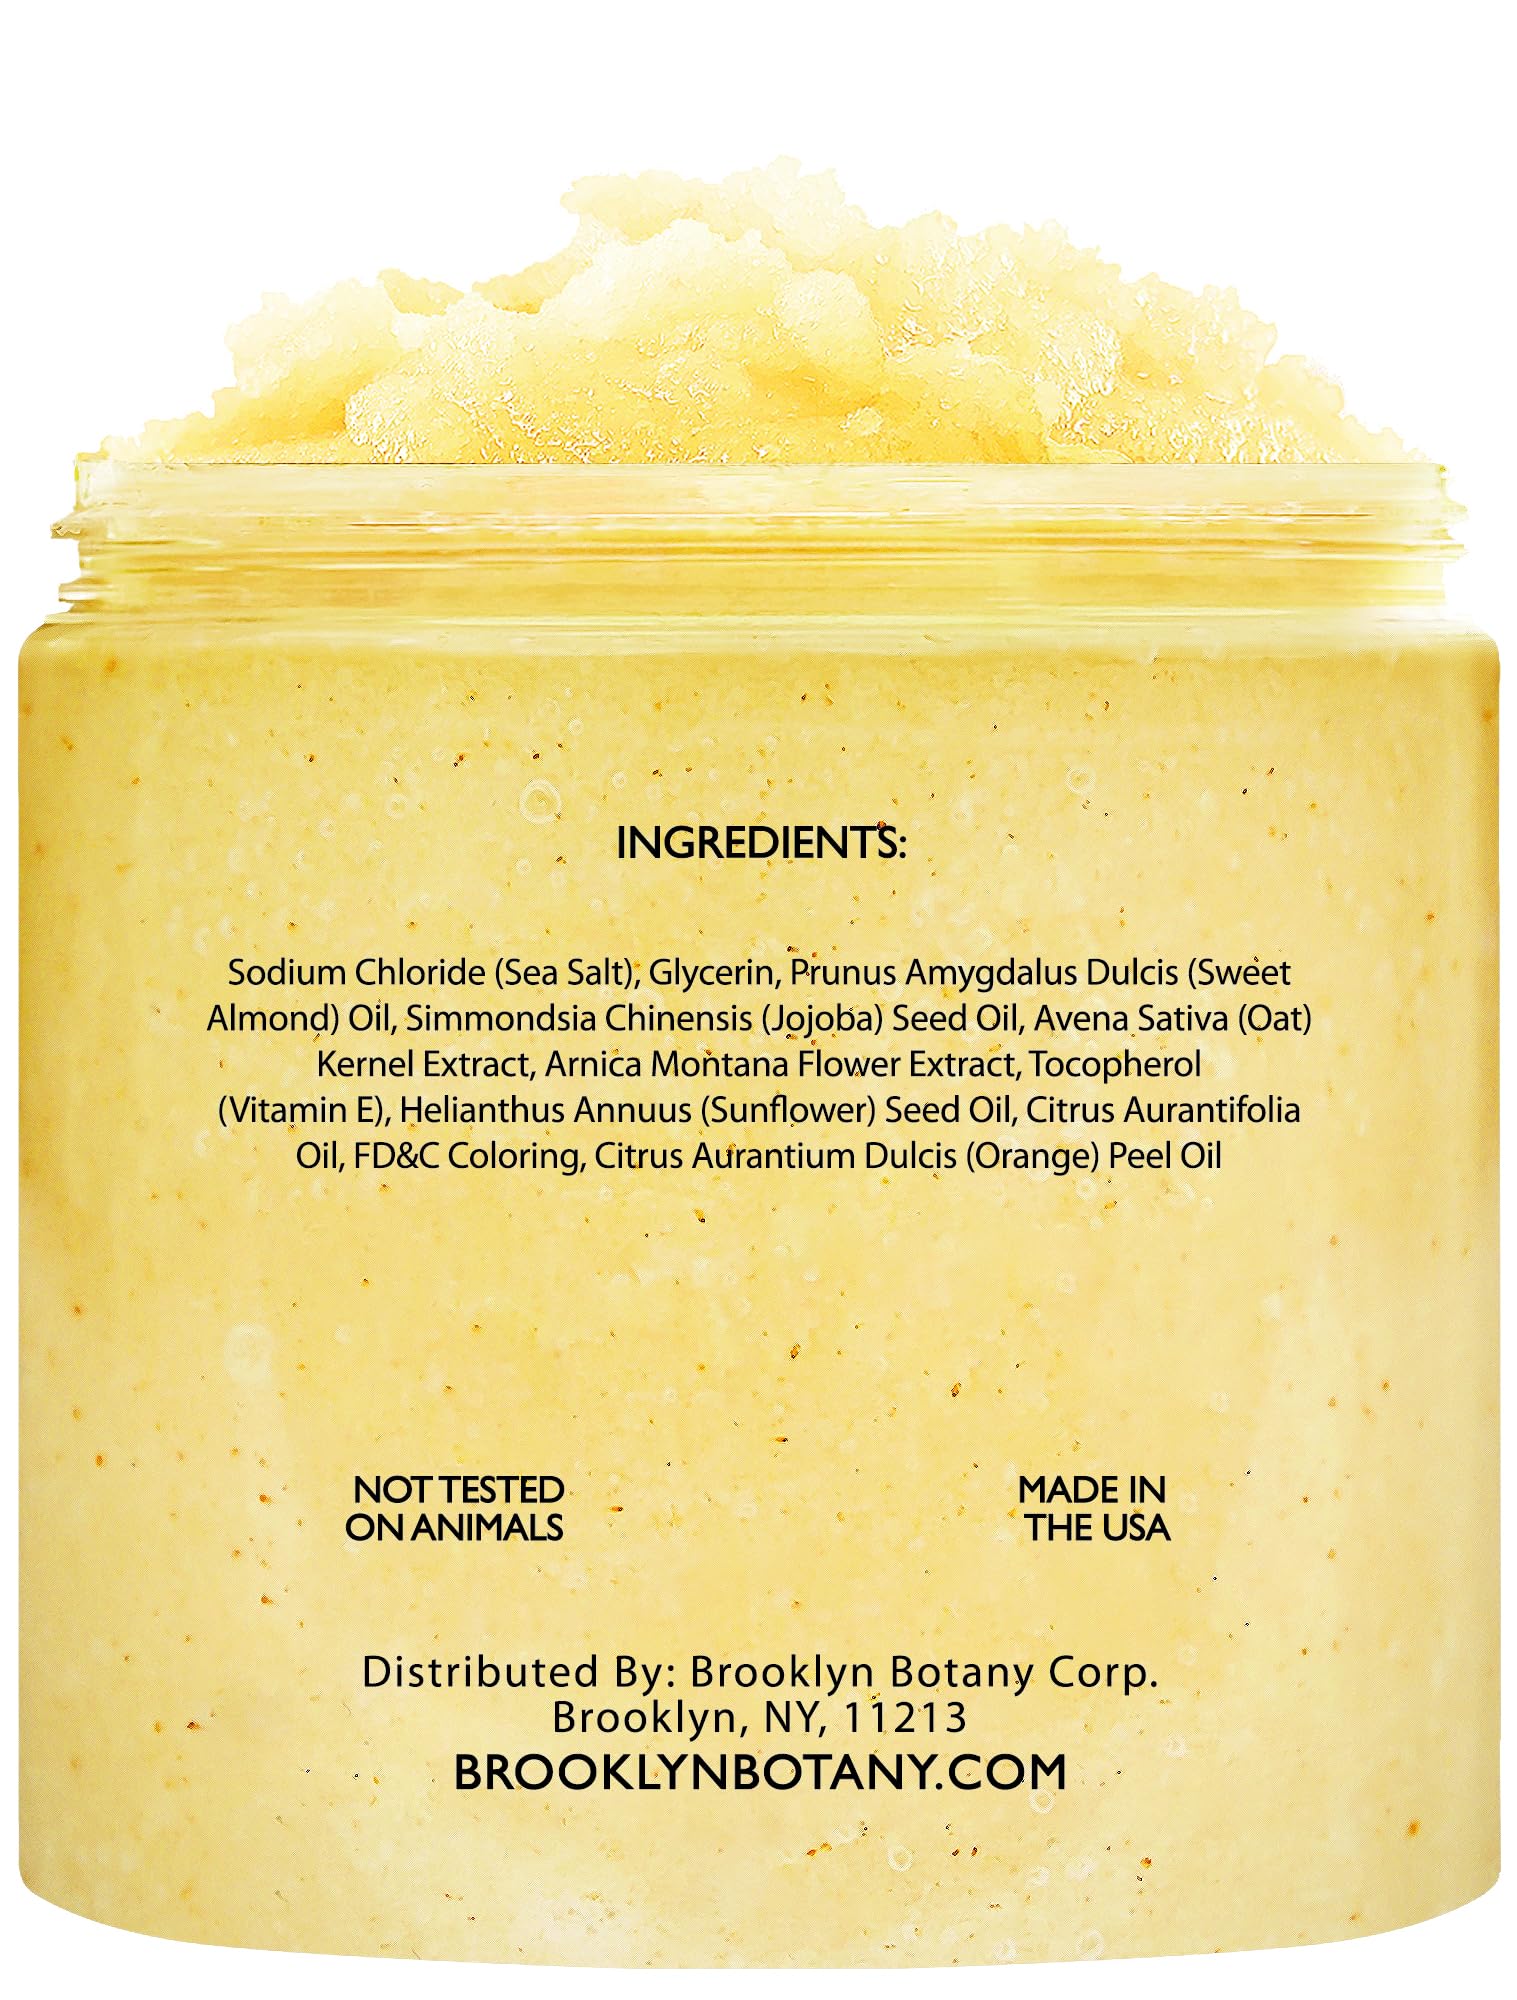 Brooklyn Botany Dead Sea Salt and Sweet Orange Body Scrub - Moisturizing and Exfoliating Body, Face, Hand, Foot Scrub - Fights Stretch Marks, Fine Lines, Wrinkles - Great Gifts for Women & Men - 10 oz